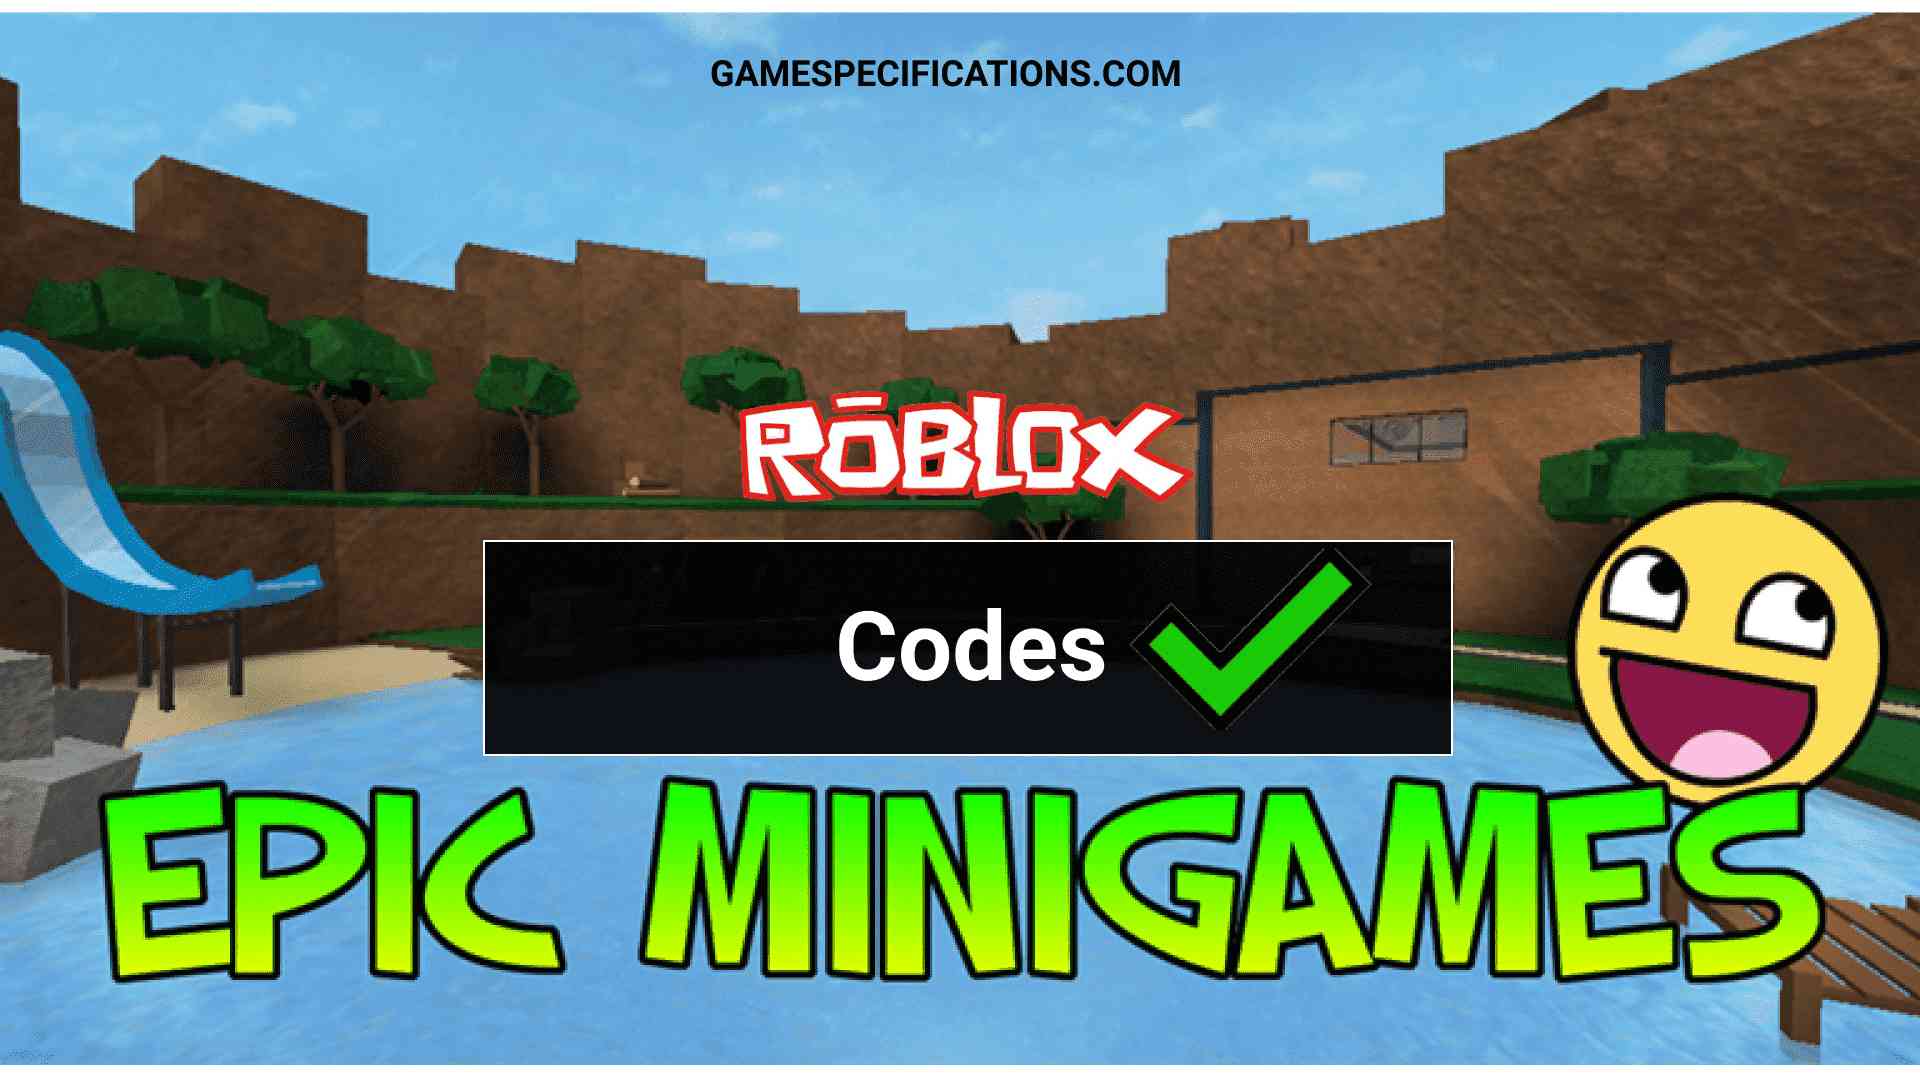 Roblox Epic Minigames Codes To Get Free Items July 2021 Game Specifications - epic gear codes for roblox